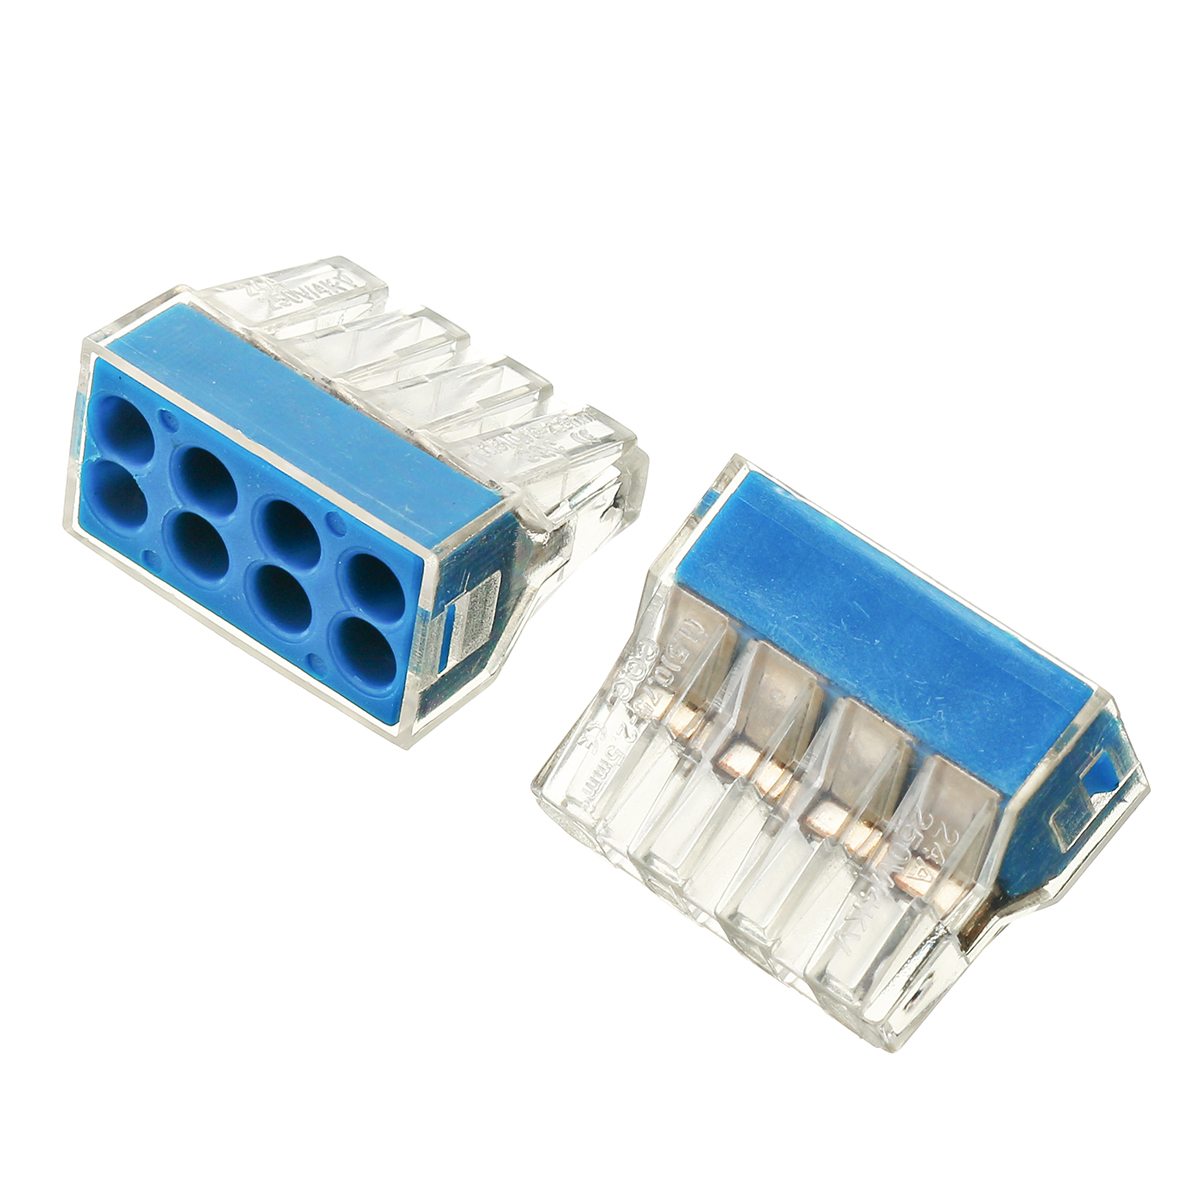 10Pcs-8-Holes-Universal-Compact-Terminal-Block-Electric-Cable-Wire-Connector-1384417-5